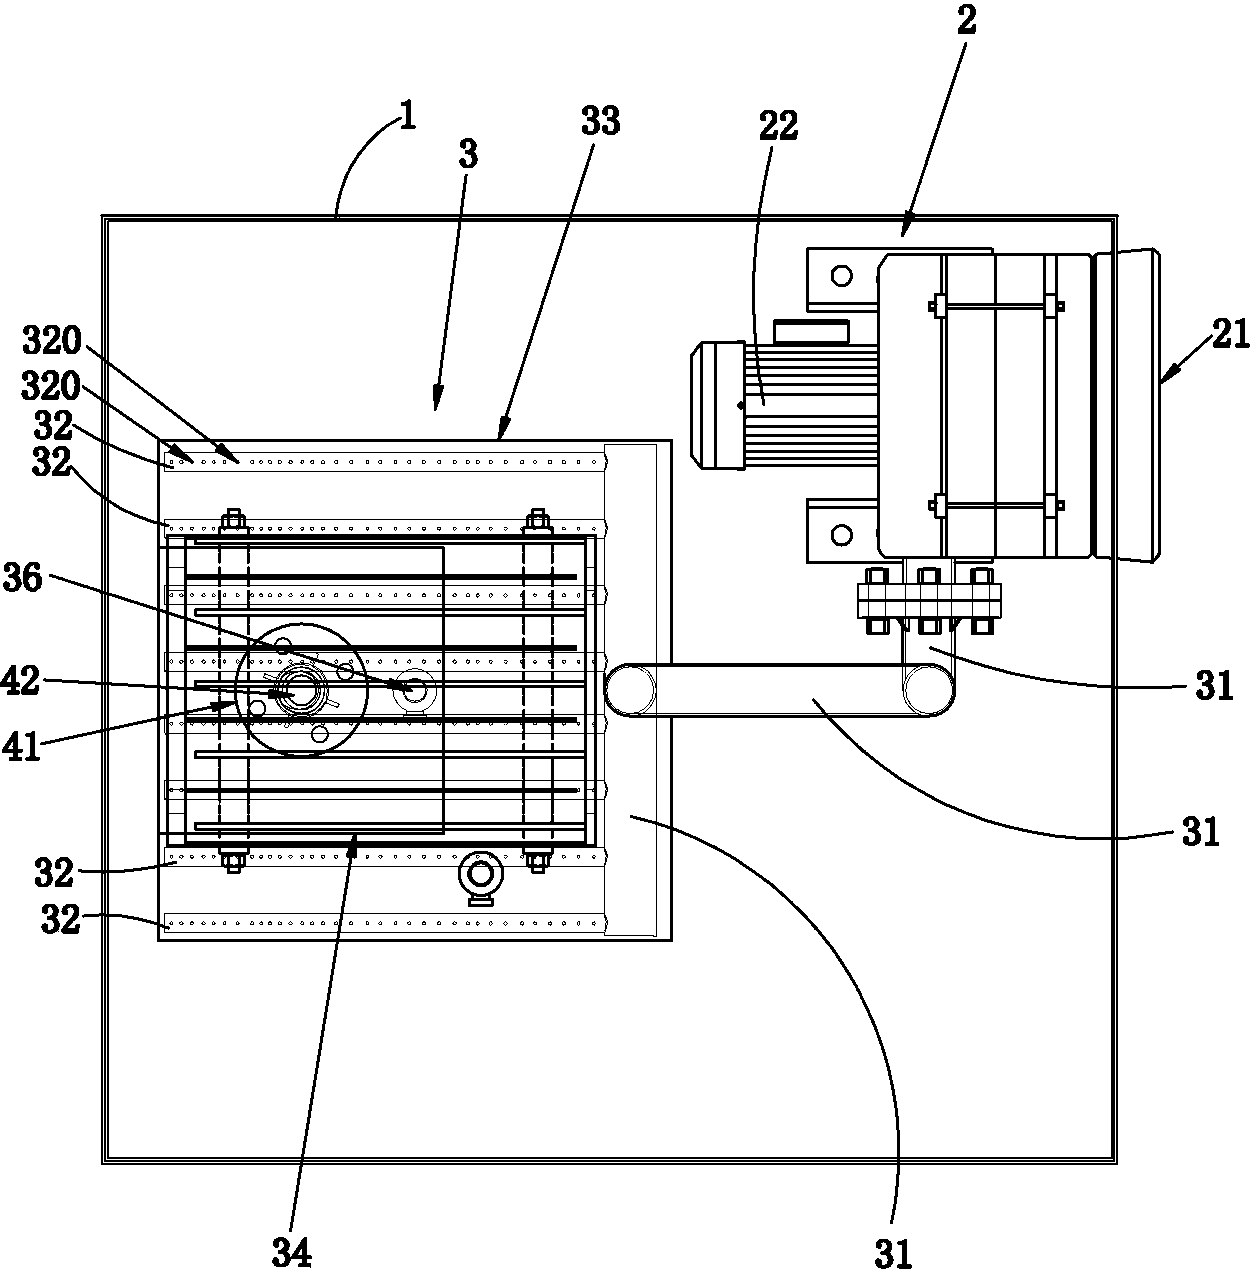 Air cleaning device and method for removing formaldehyde and PM2.5